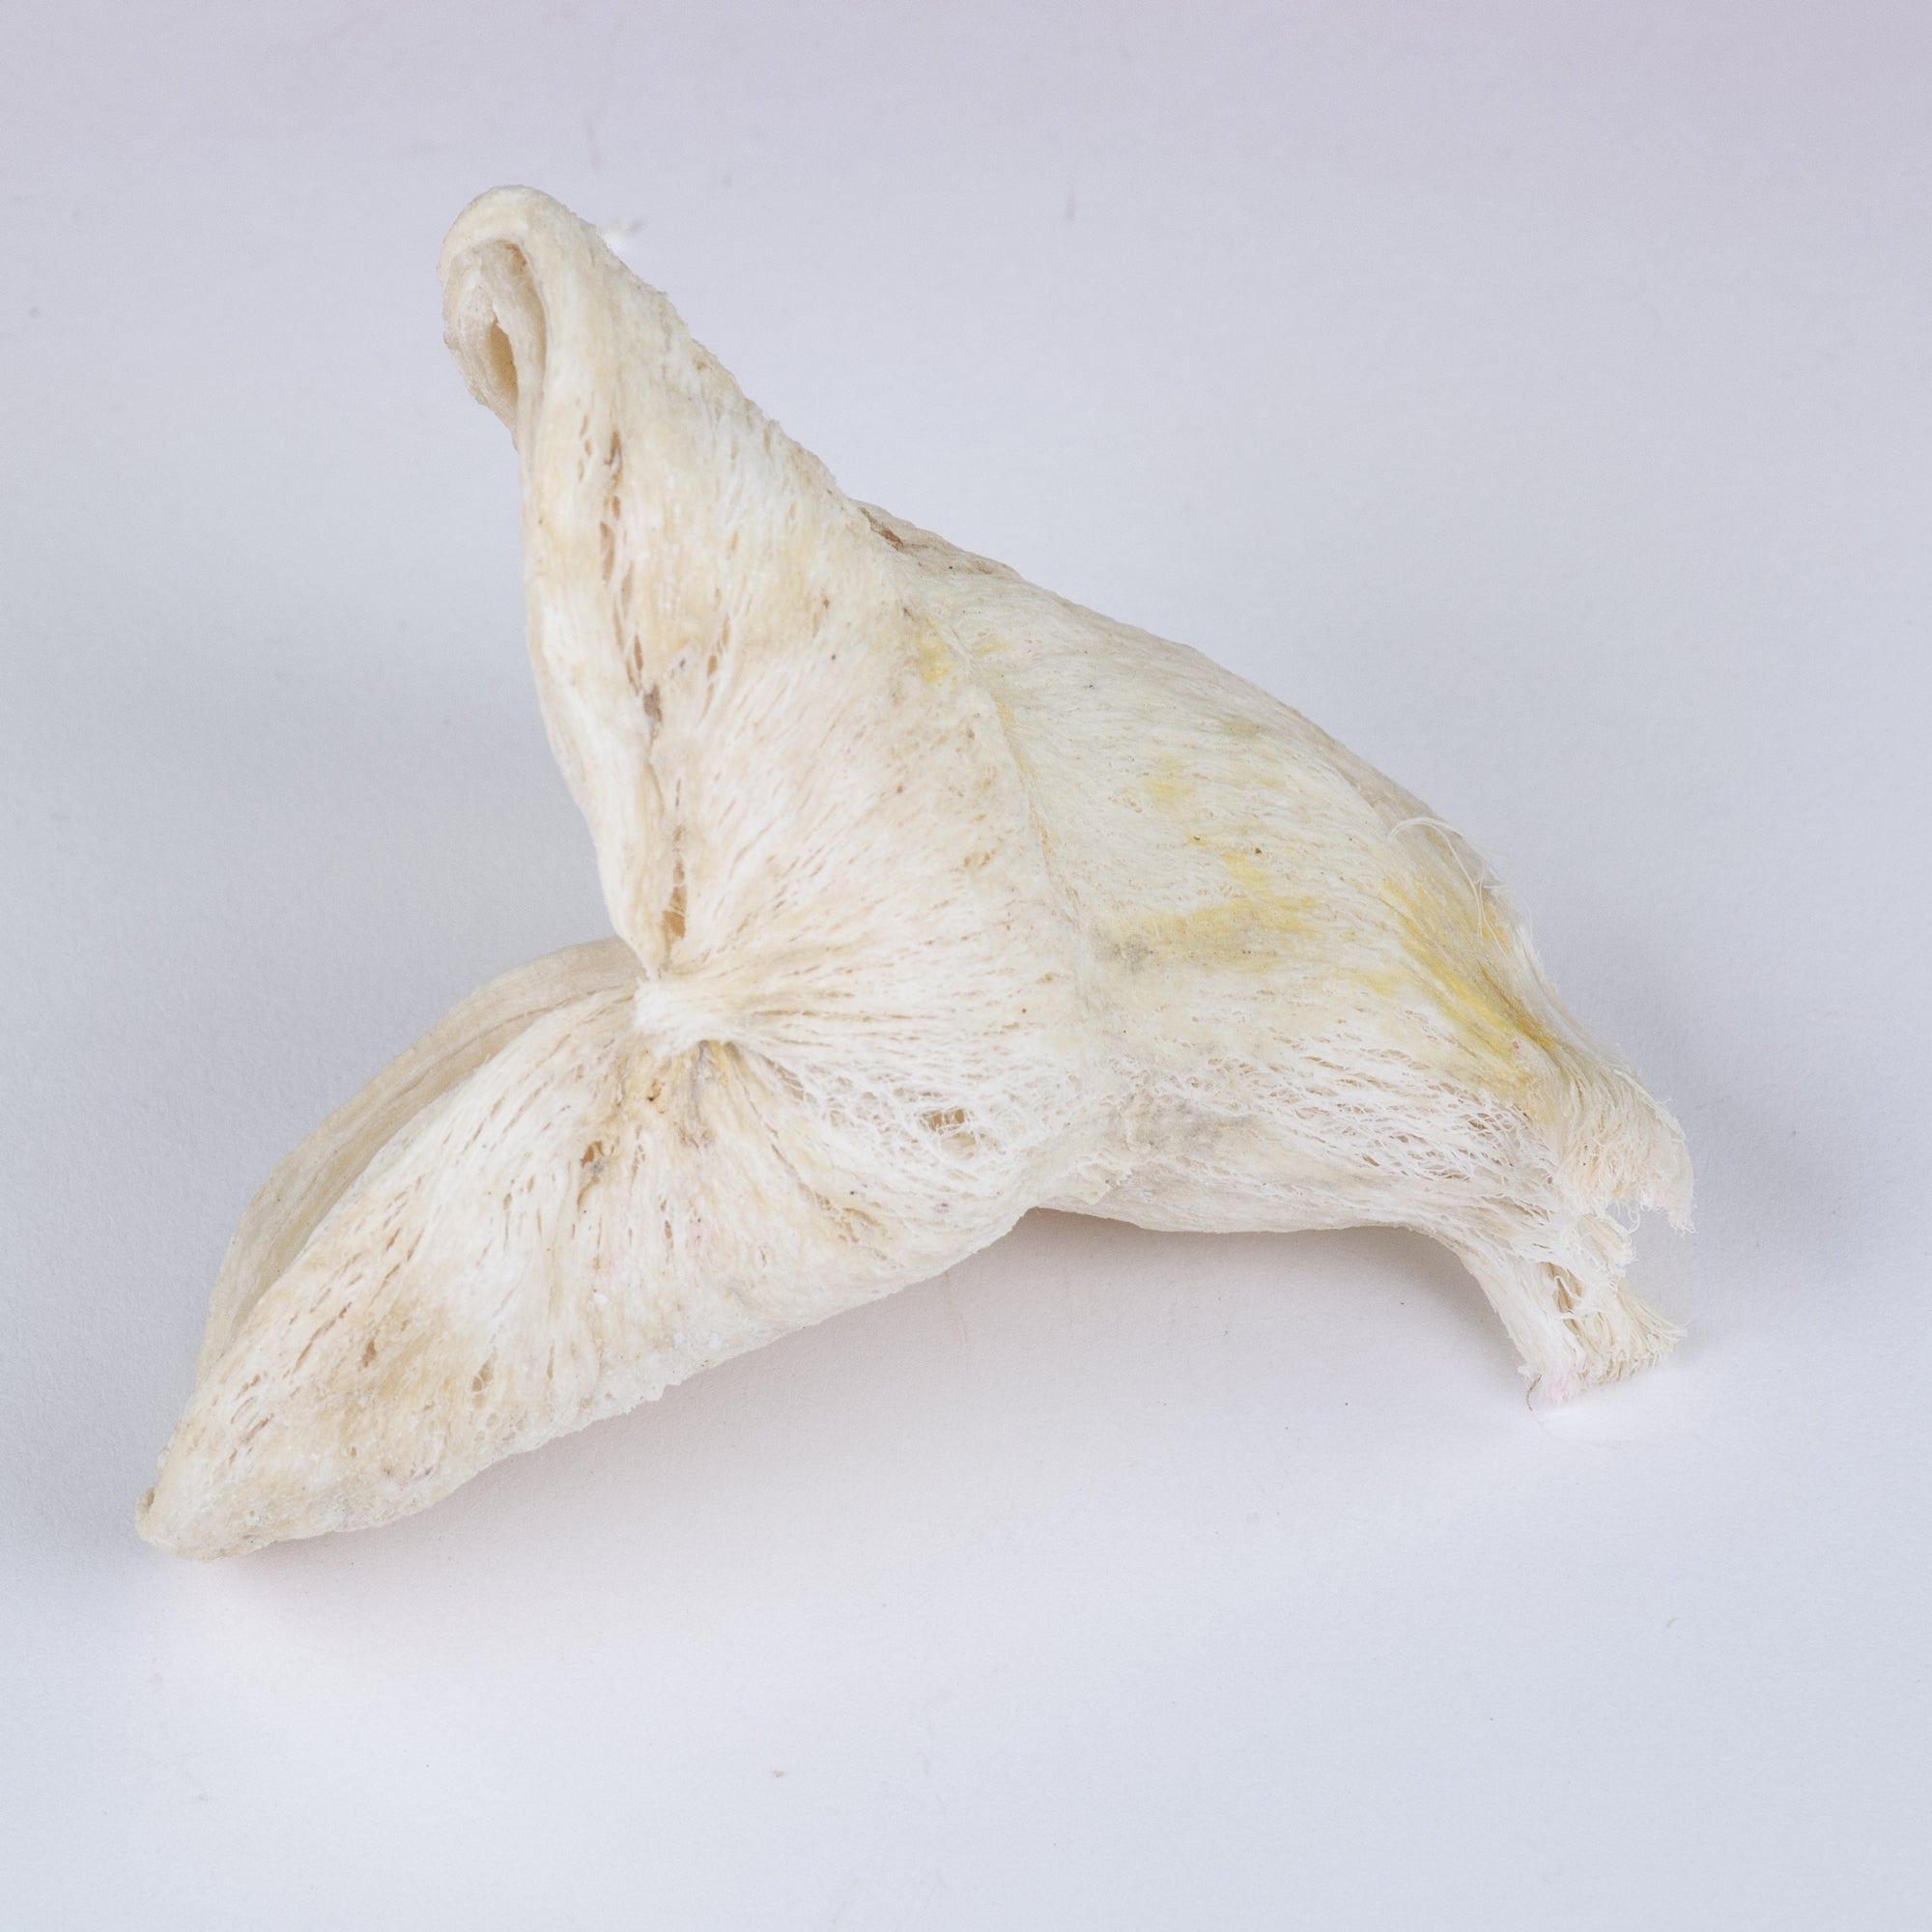 This image shows a box of bleached badam pods against a white background.